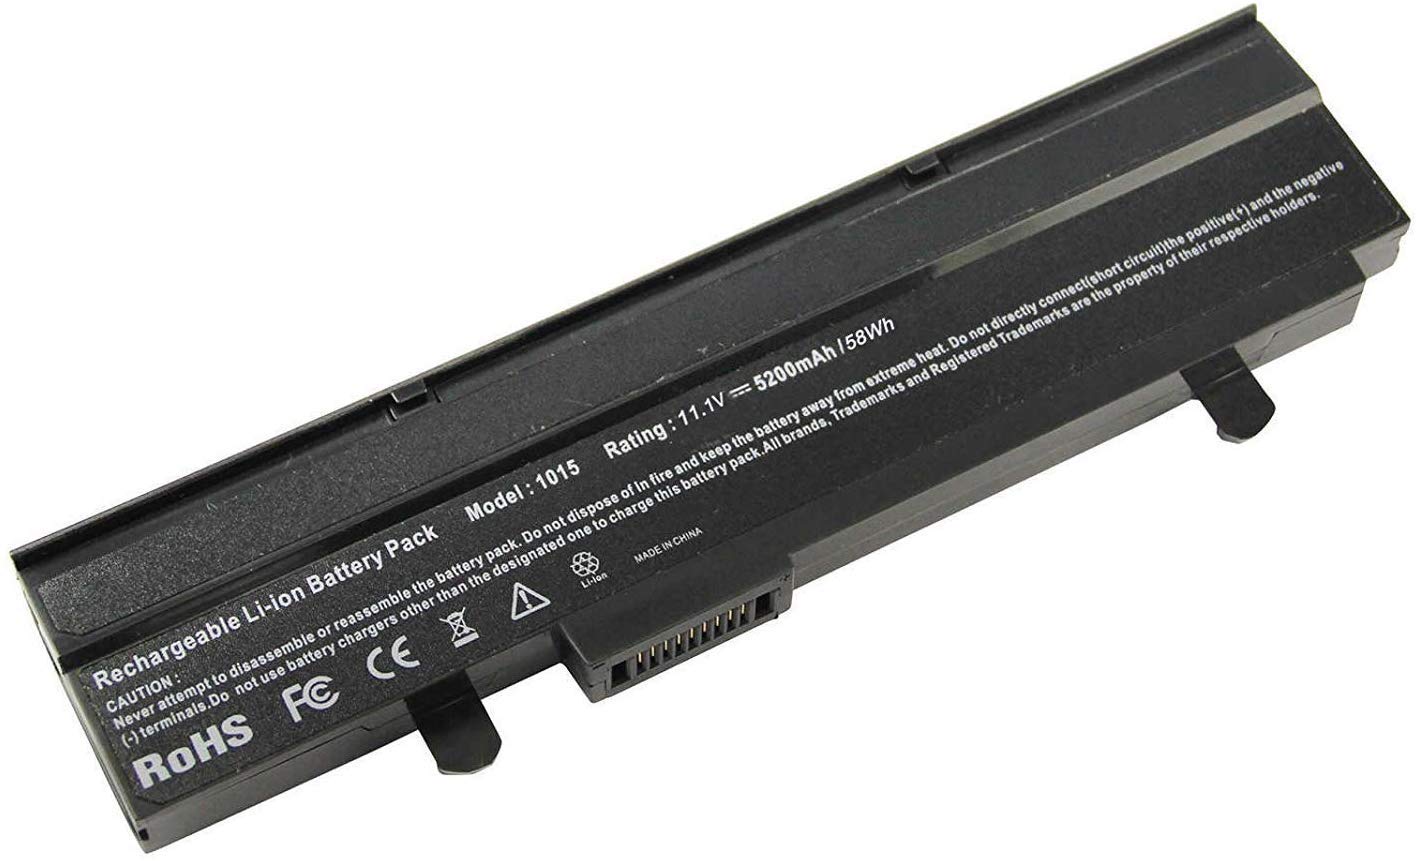 Laptop Battery Compatible with Asus A31-1015 A32-1015 07G016GF1875 90OA001B2300Q 90-OA001B2300Q 90OA001B2500Q 90-OA001B2500Q 90OA001B2700Q 90-OA001B2700Q 90-XB29OABT00000Q